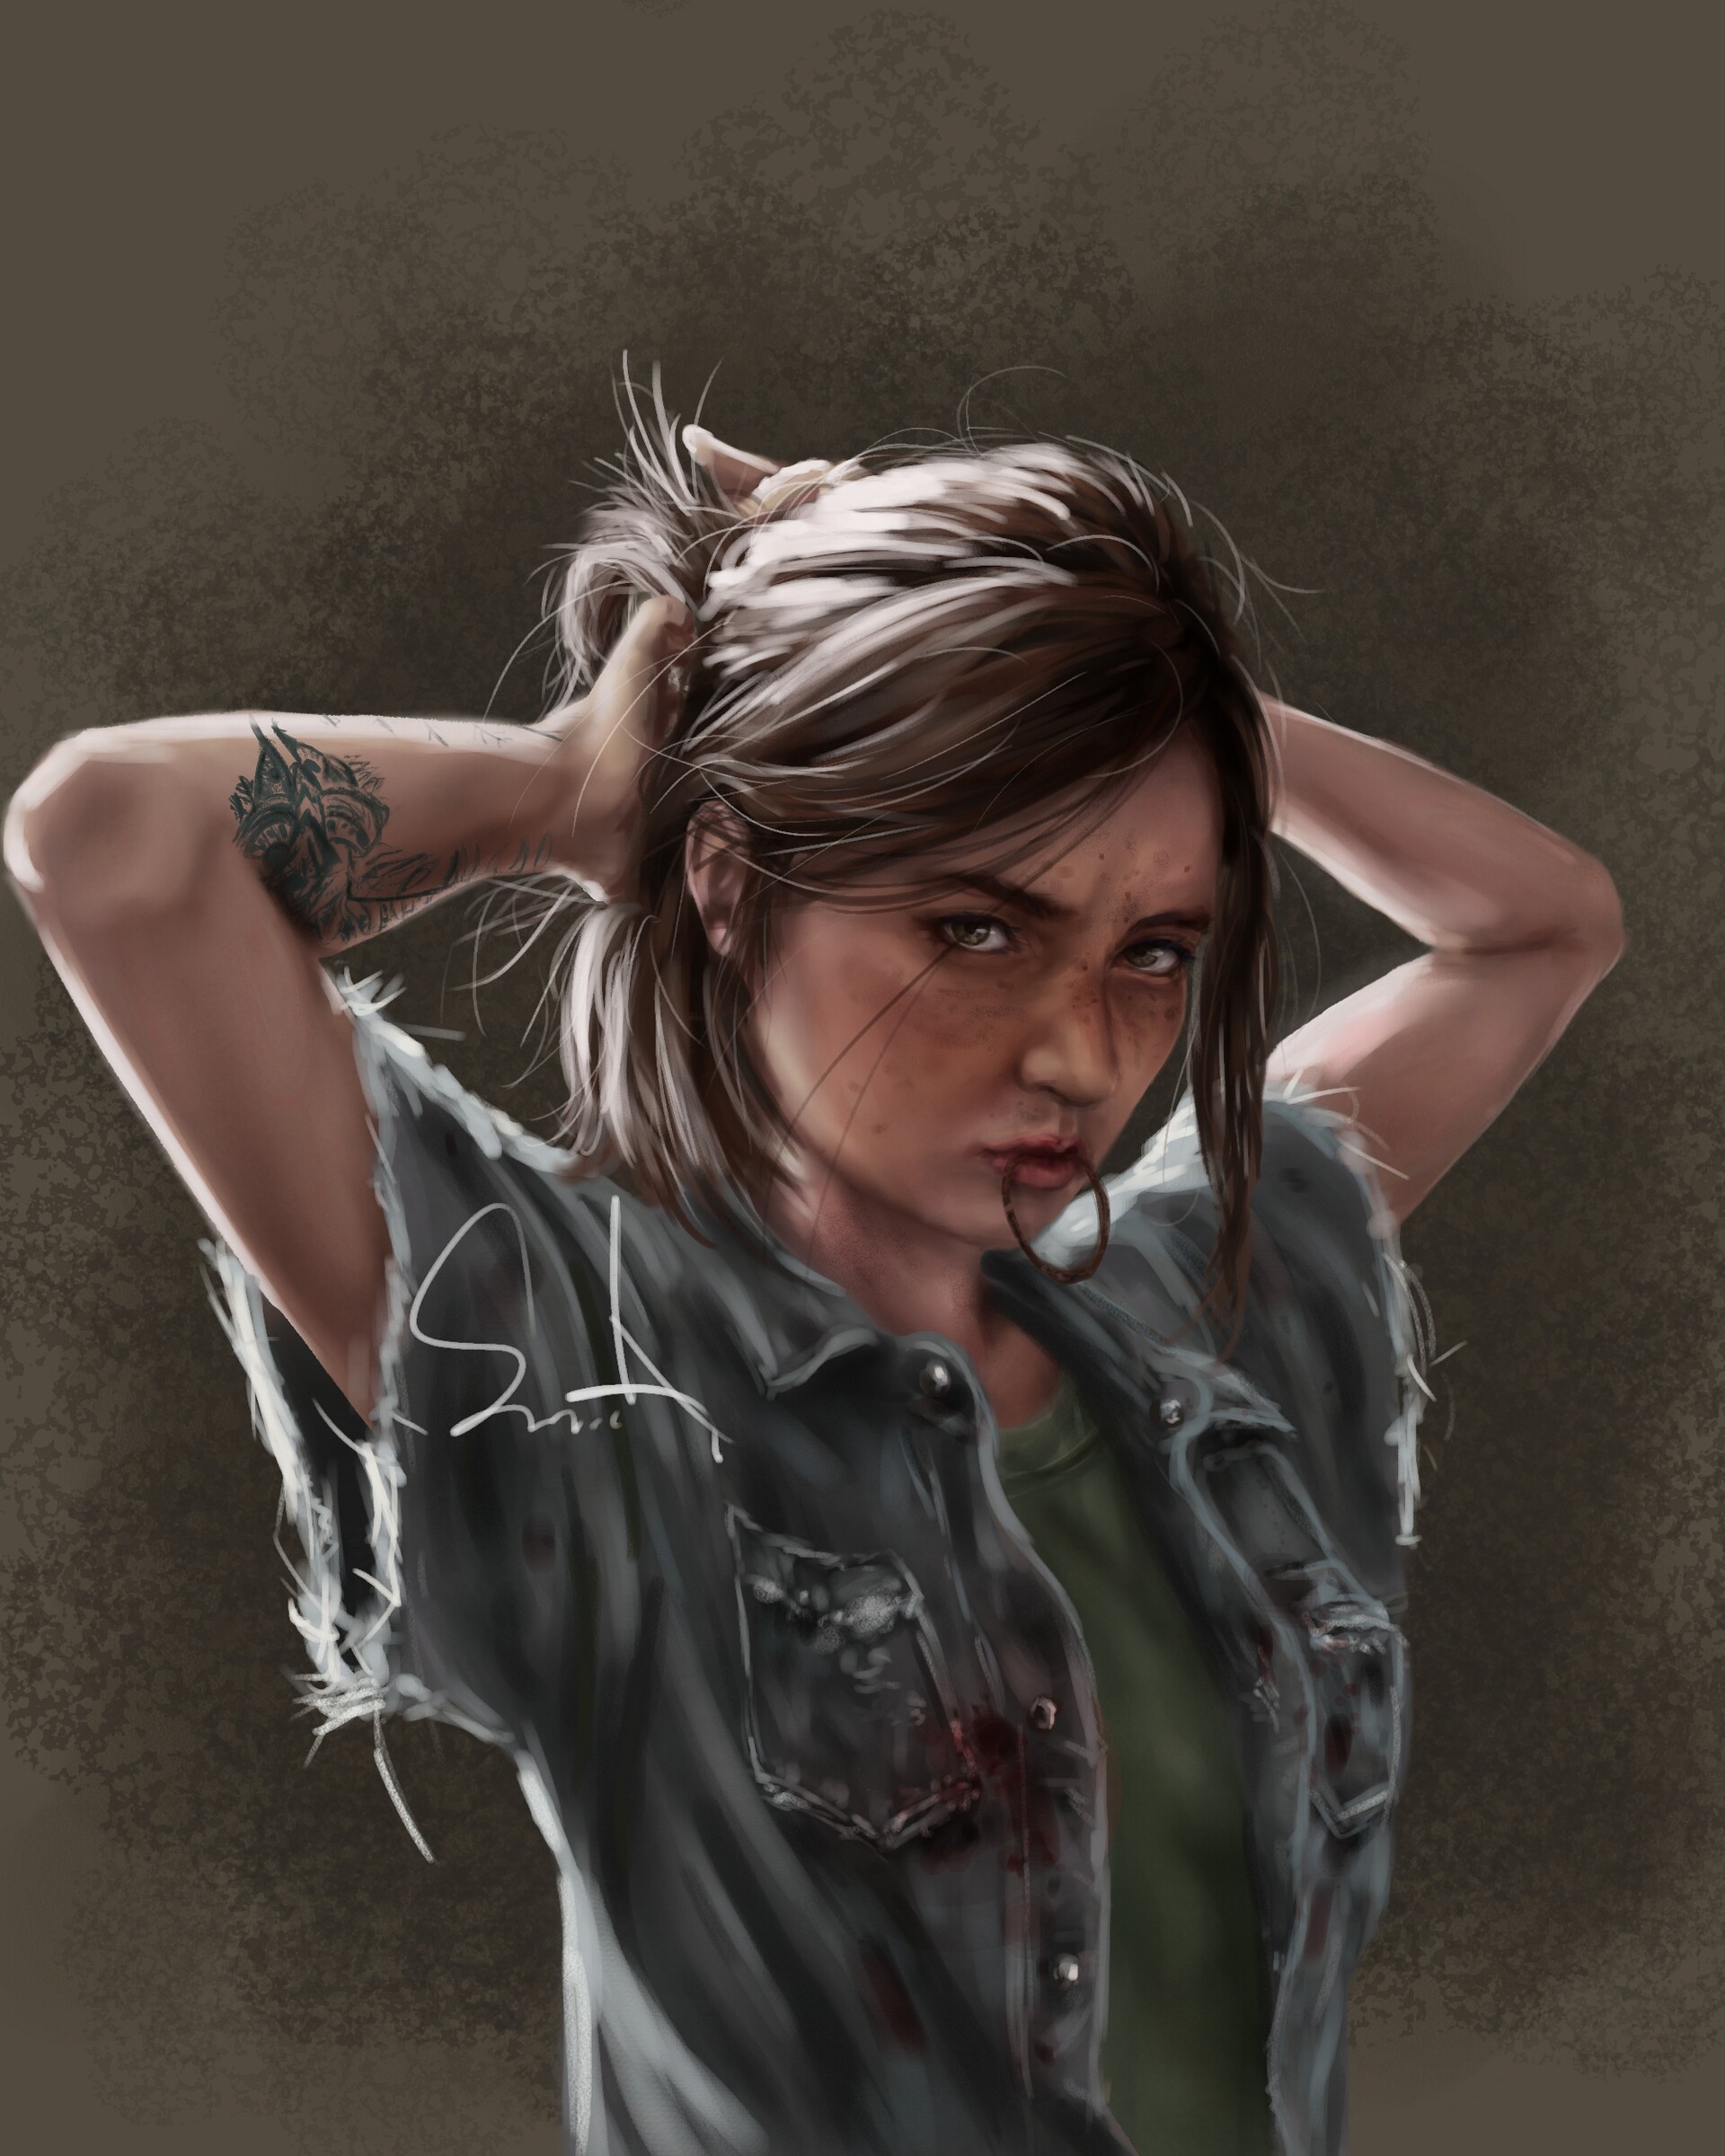 General 1920x2400 Small Alley video games video game girls artwork video game characters digital painting digital art messy hair green top hand(s) in hair arm(s) behind head T-shirt grey jacket looking at viewer brunette green eyes blood fictional character jacket tattoo portrait display portrait The Last of Us The Last of Us 2 fan art simple background tattoo sleeve brown background arms up video game art women ArtStation Ellie Williams Smalley inked girls